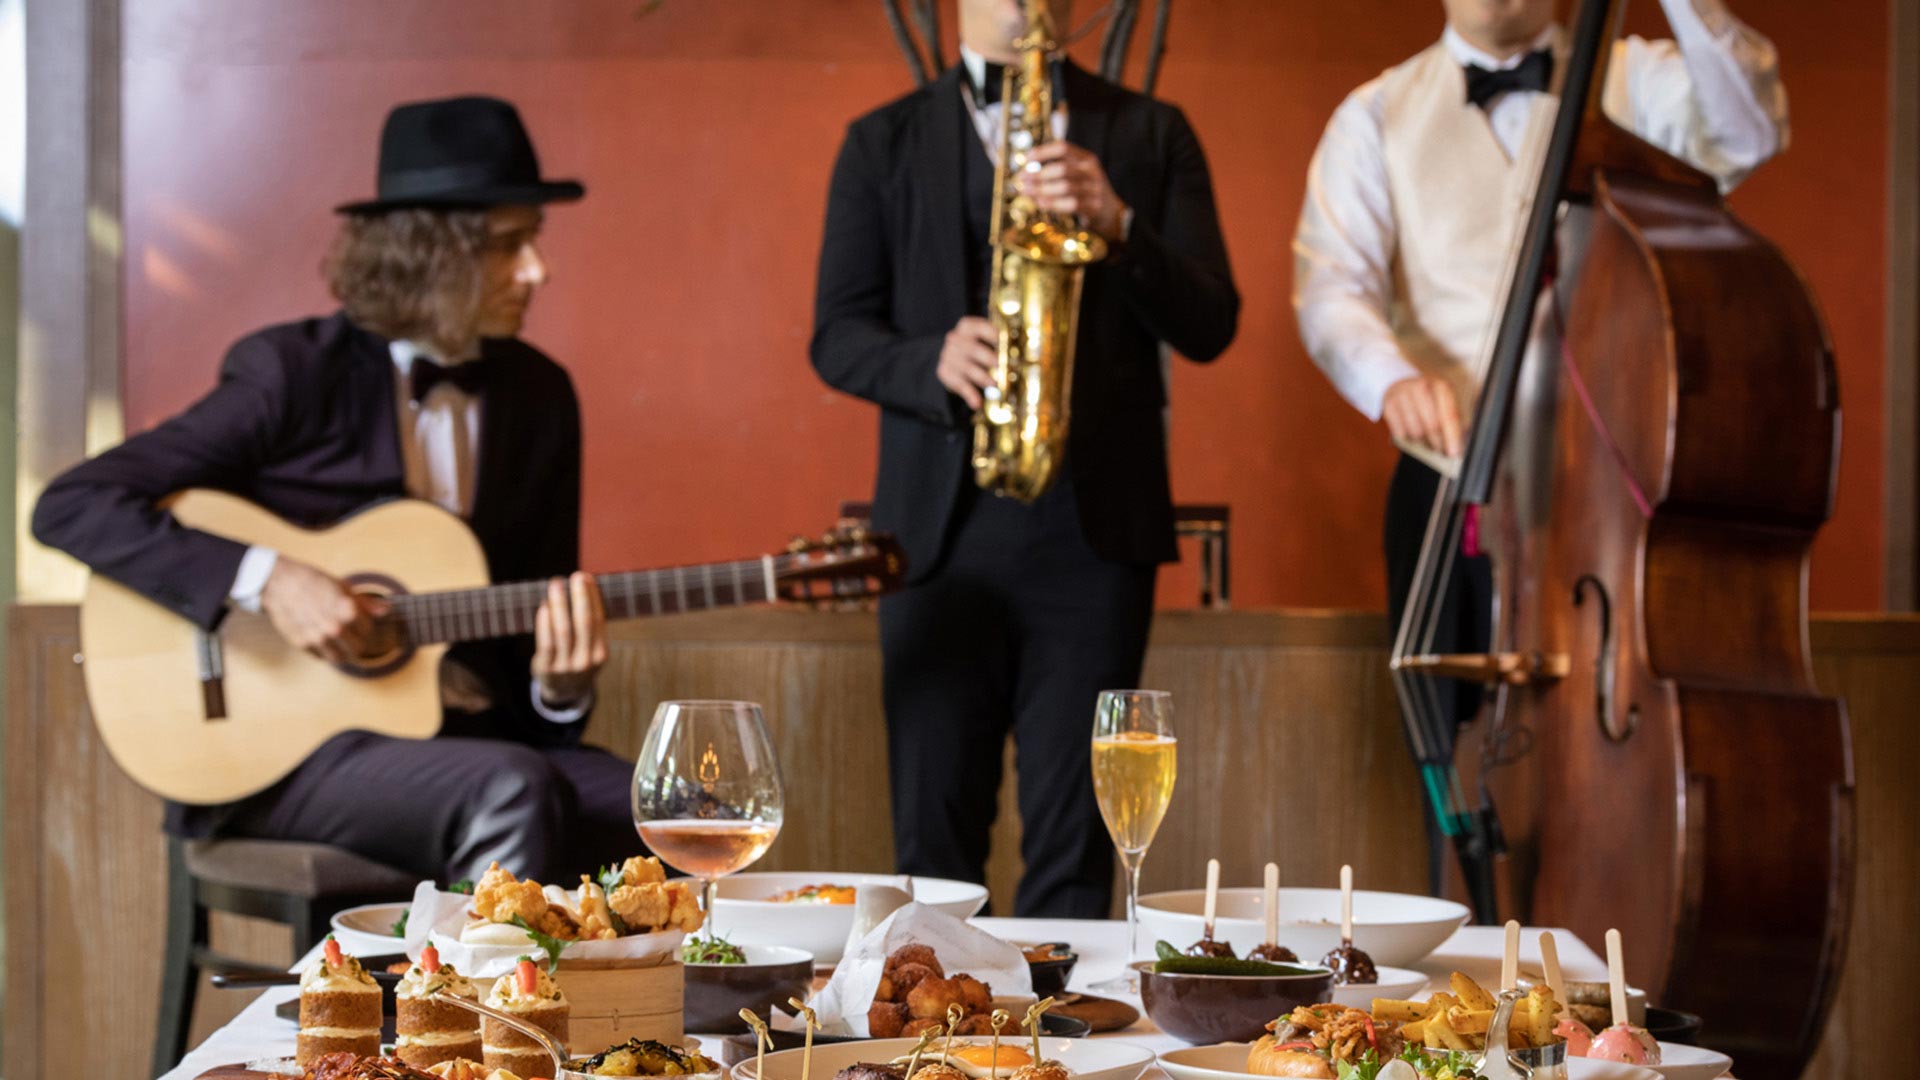 Grand Brunch at The Oak Door with Live Music